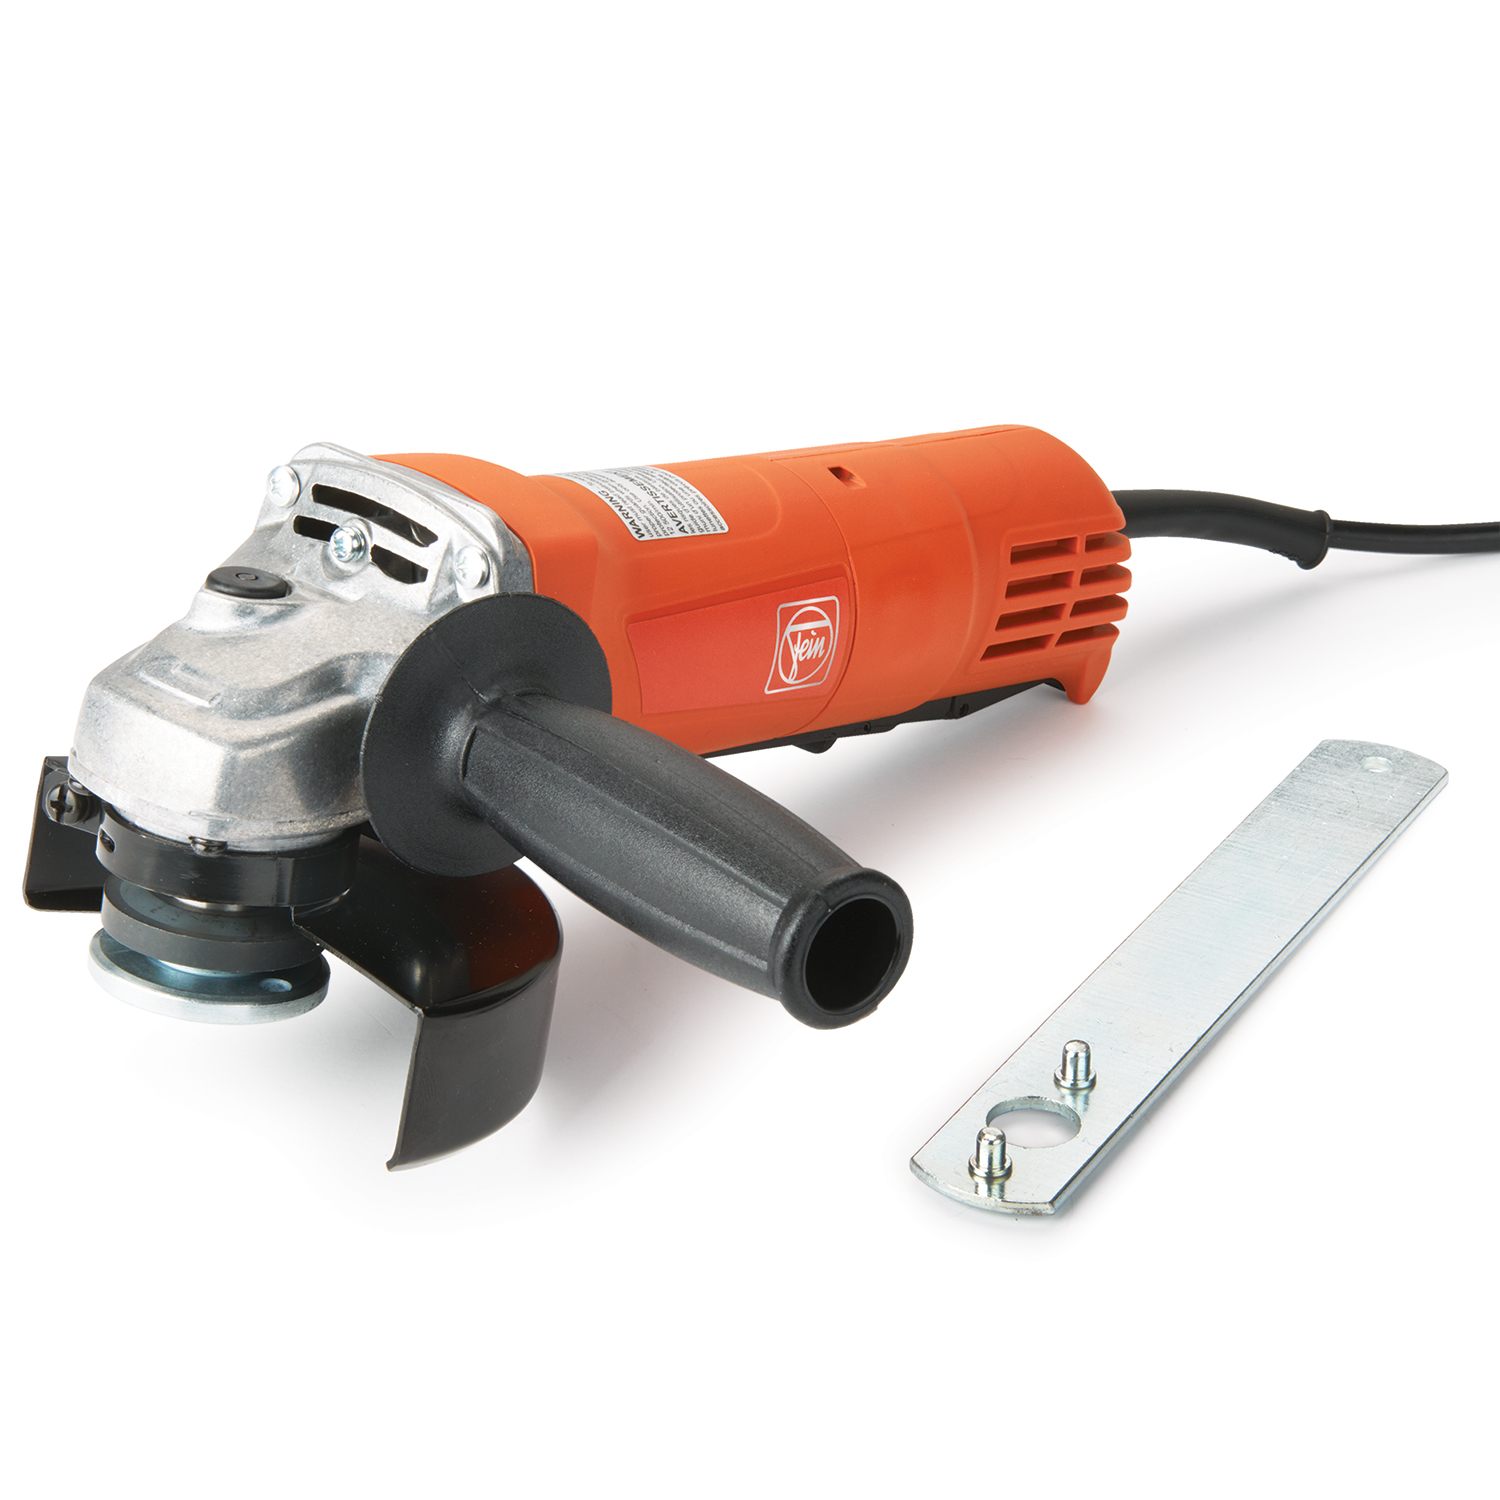 4-1/2" Compact Angle Grinder With Paddle Switch, Wsg 7-115 Pt